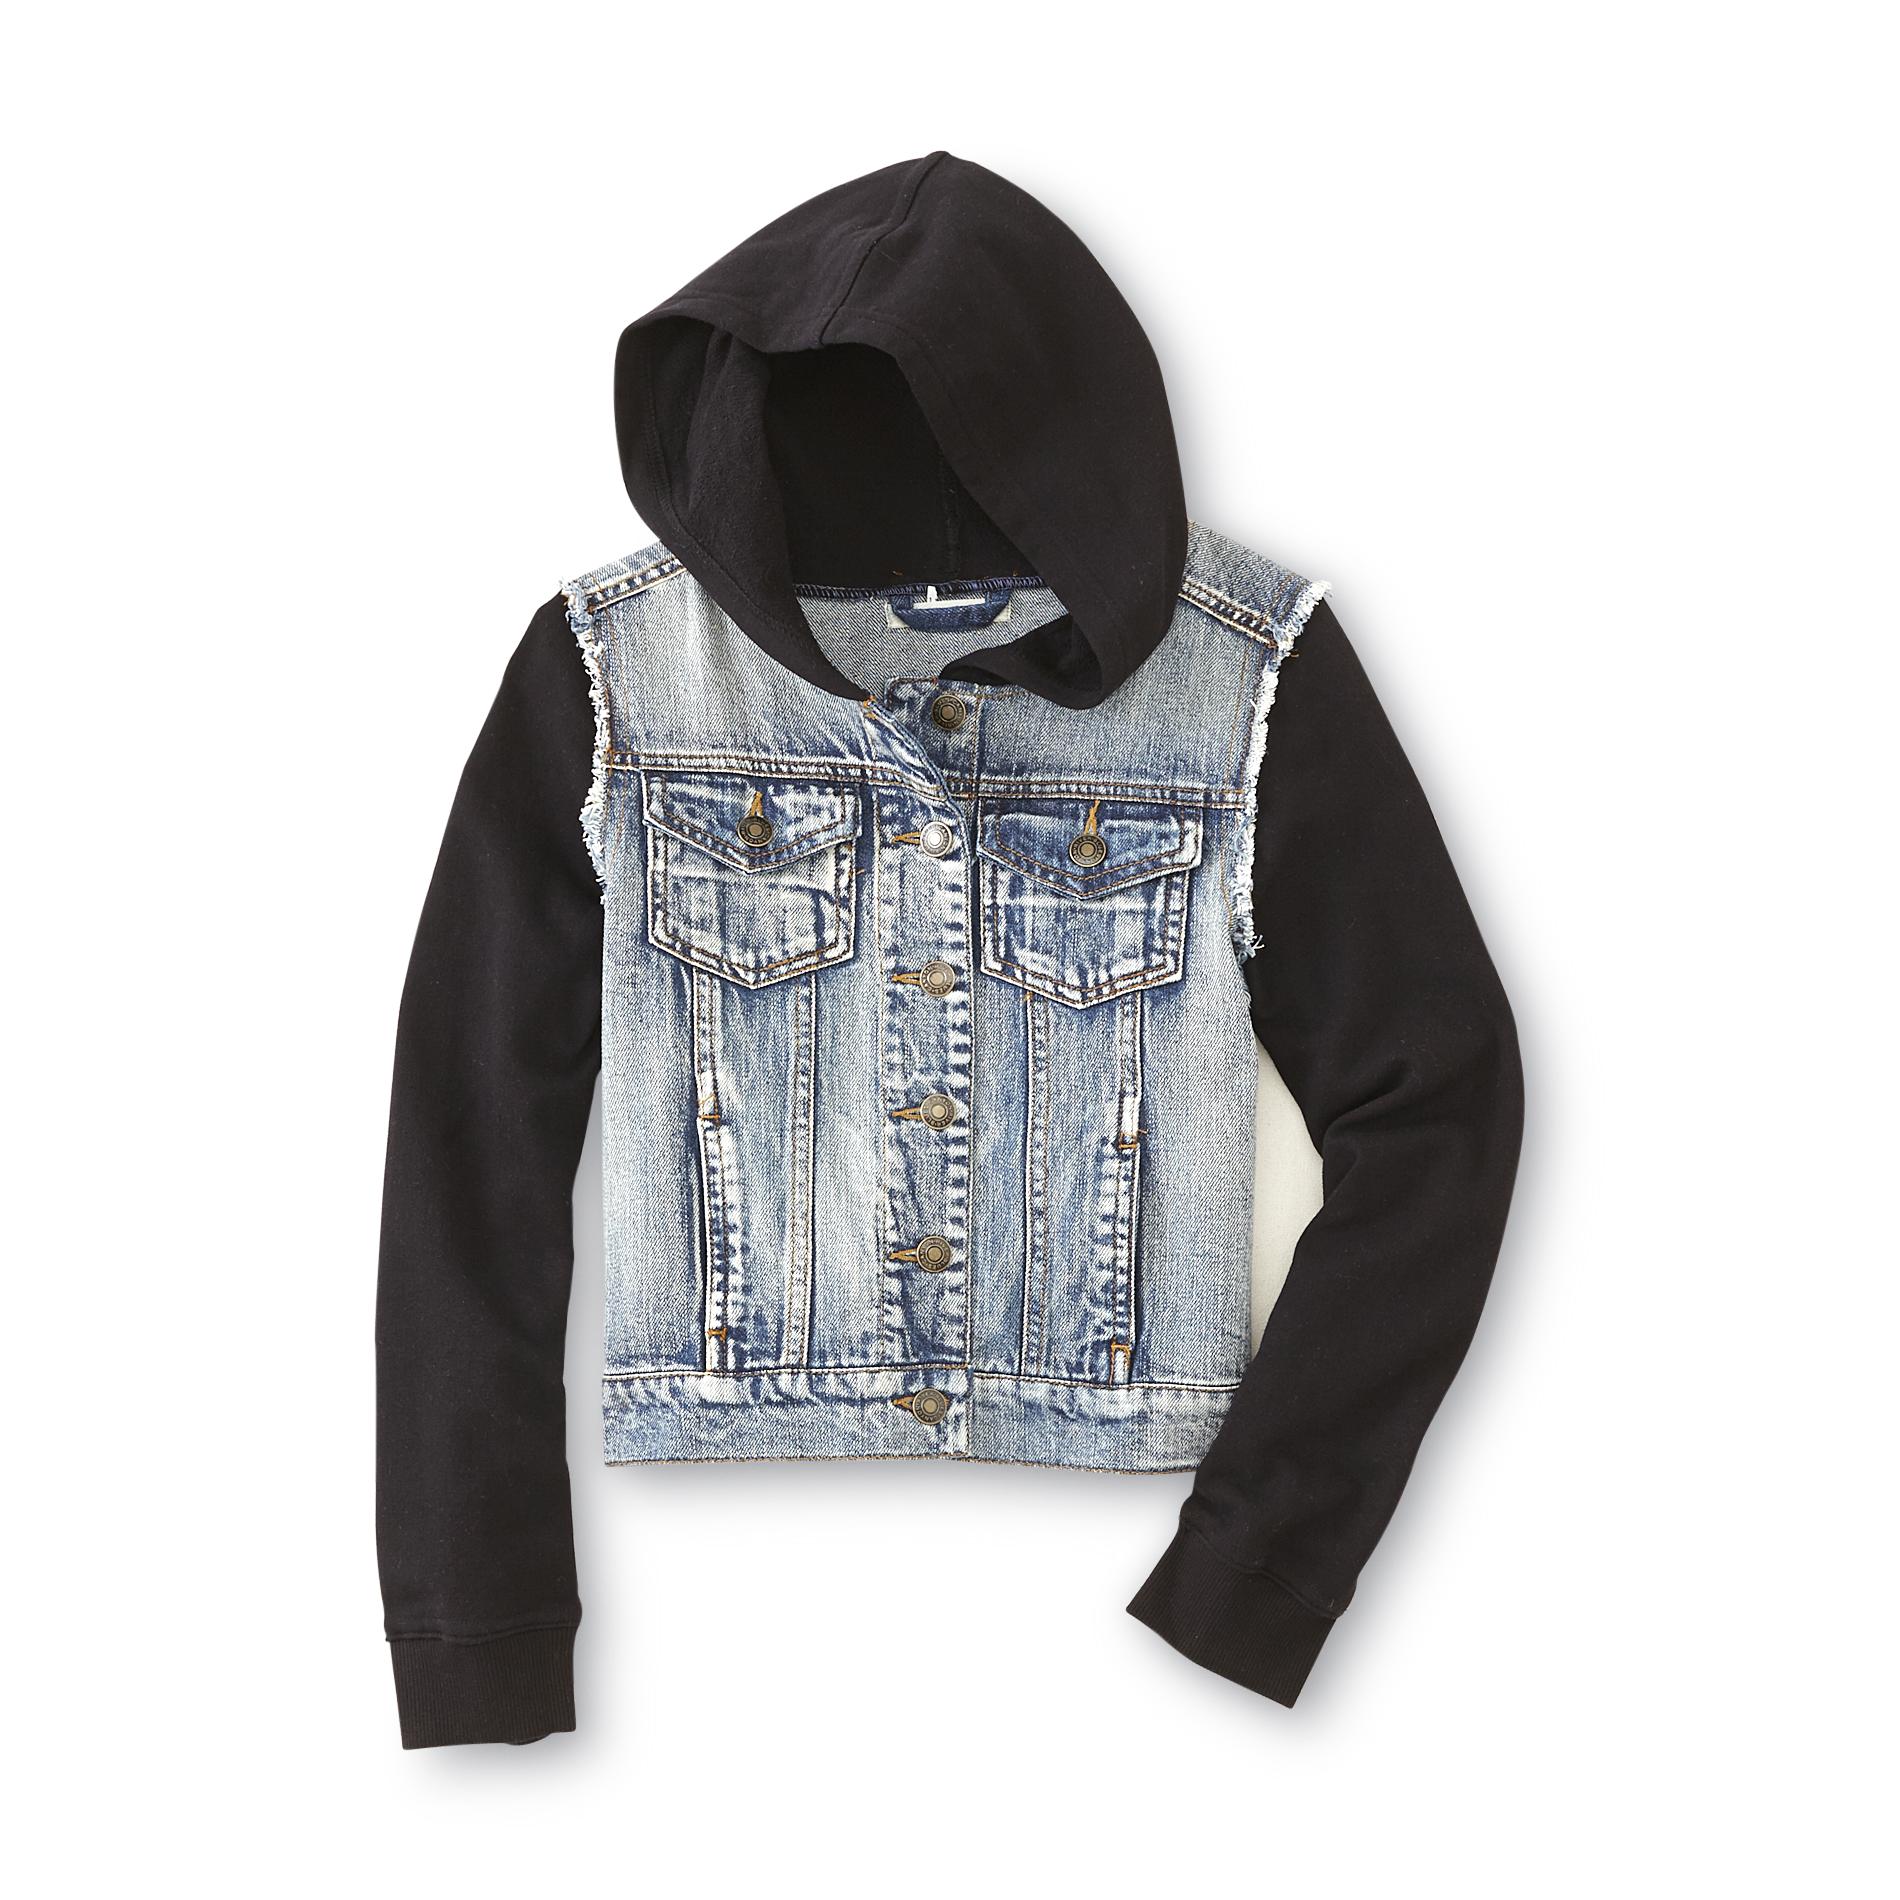 Canyon River Blues Girl's Layered-Look Denim Hoodie Jacket